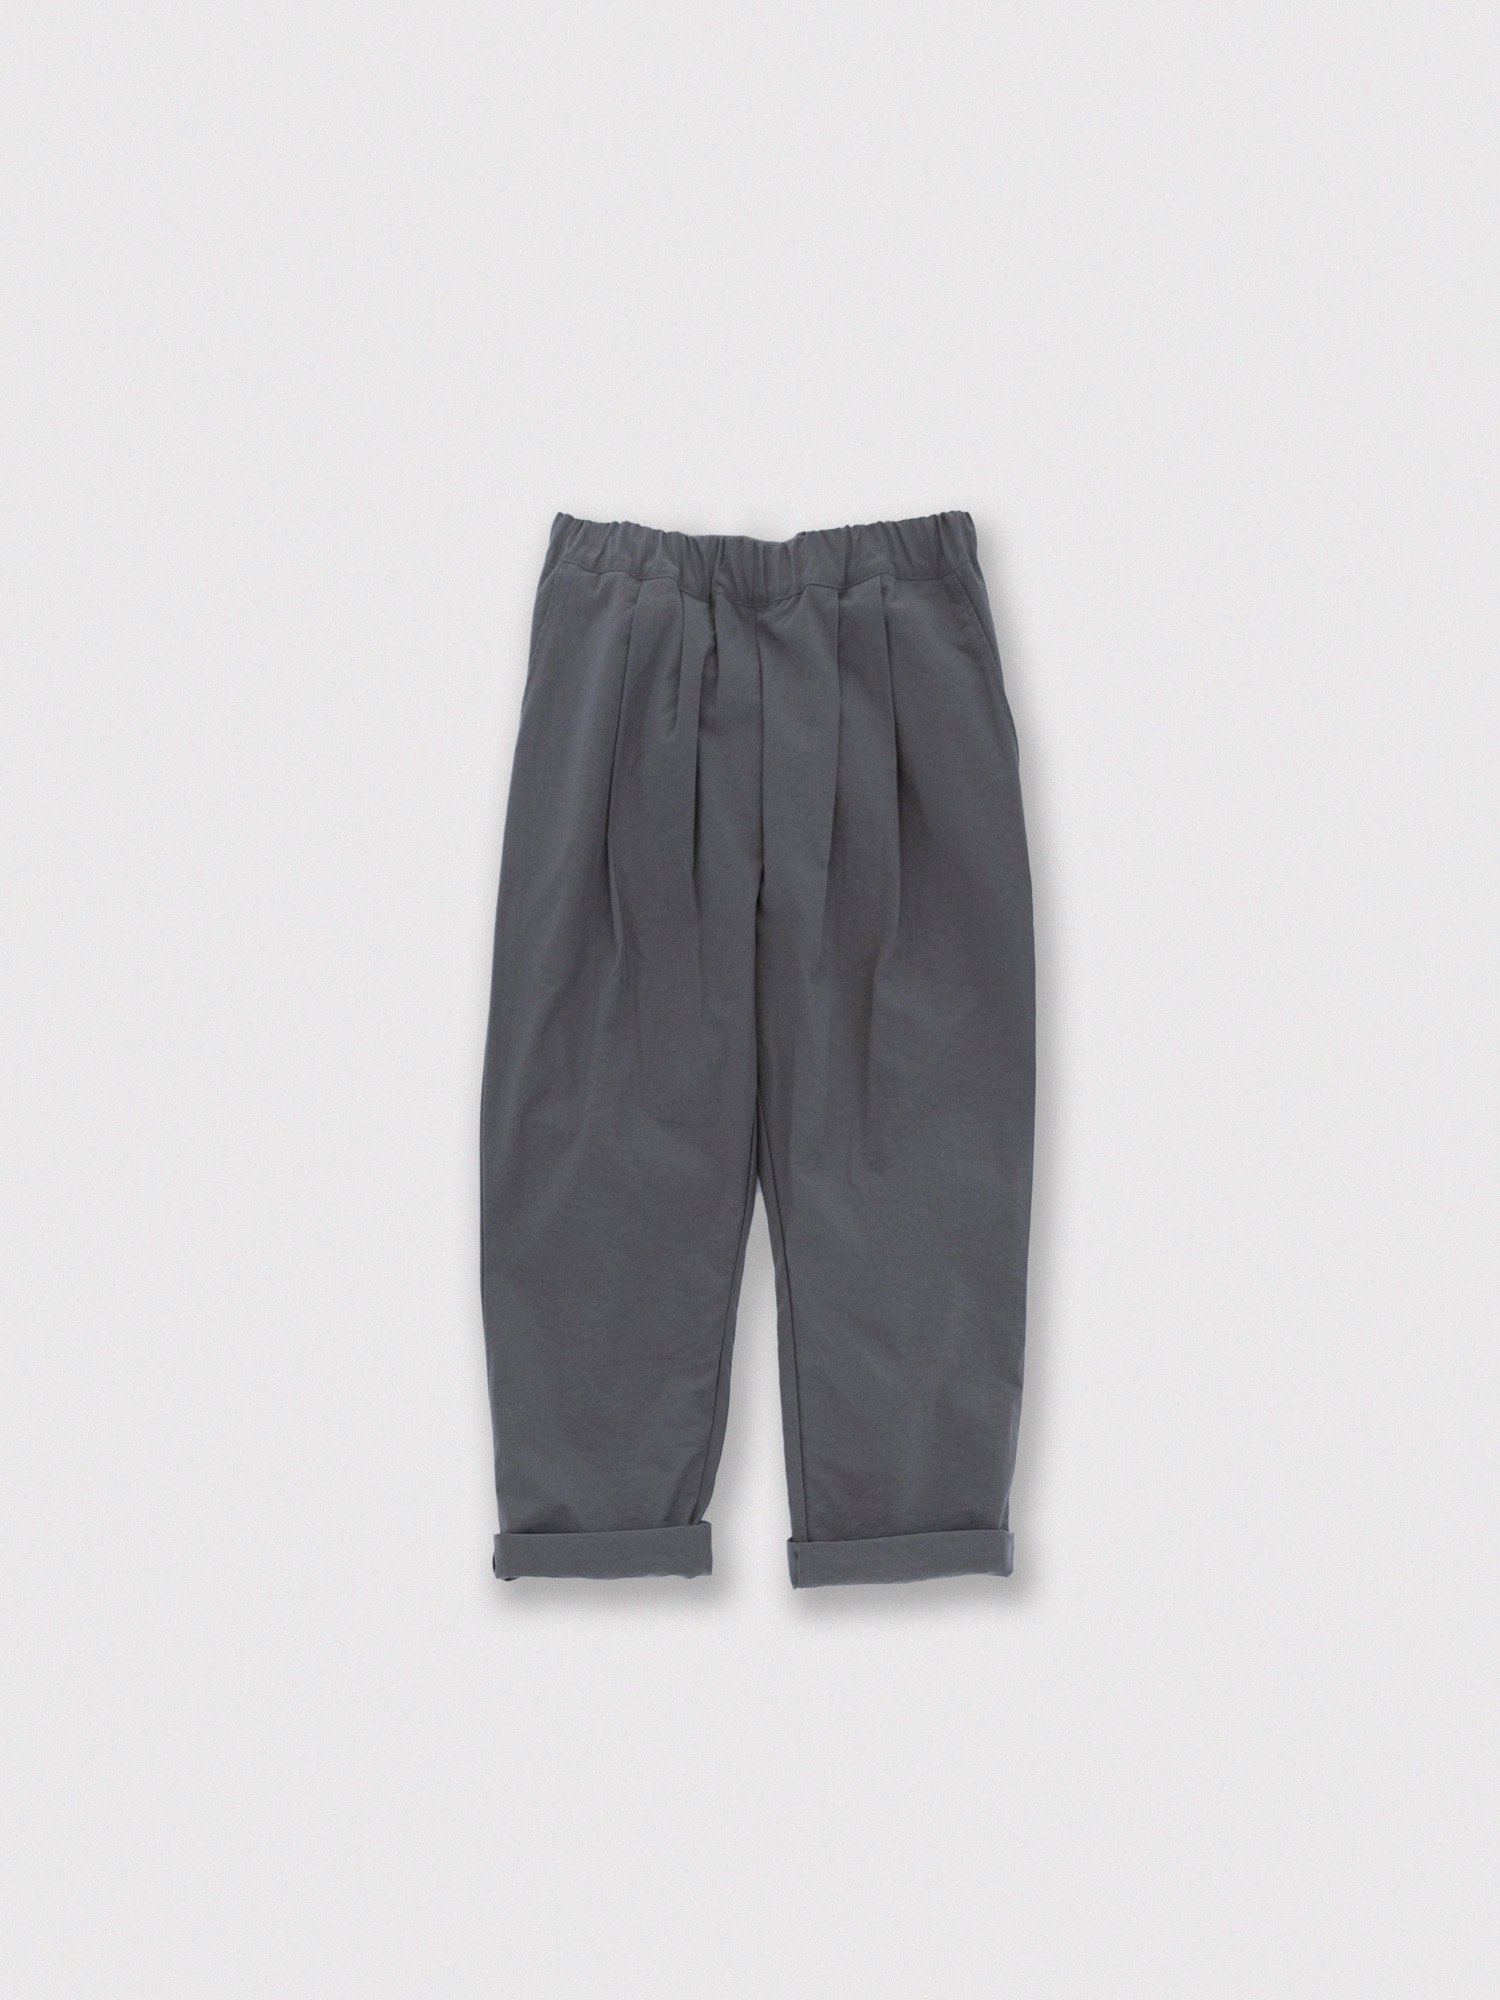 Nylon Relax pants<br /> /3color